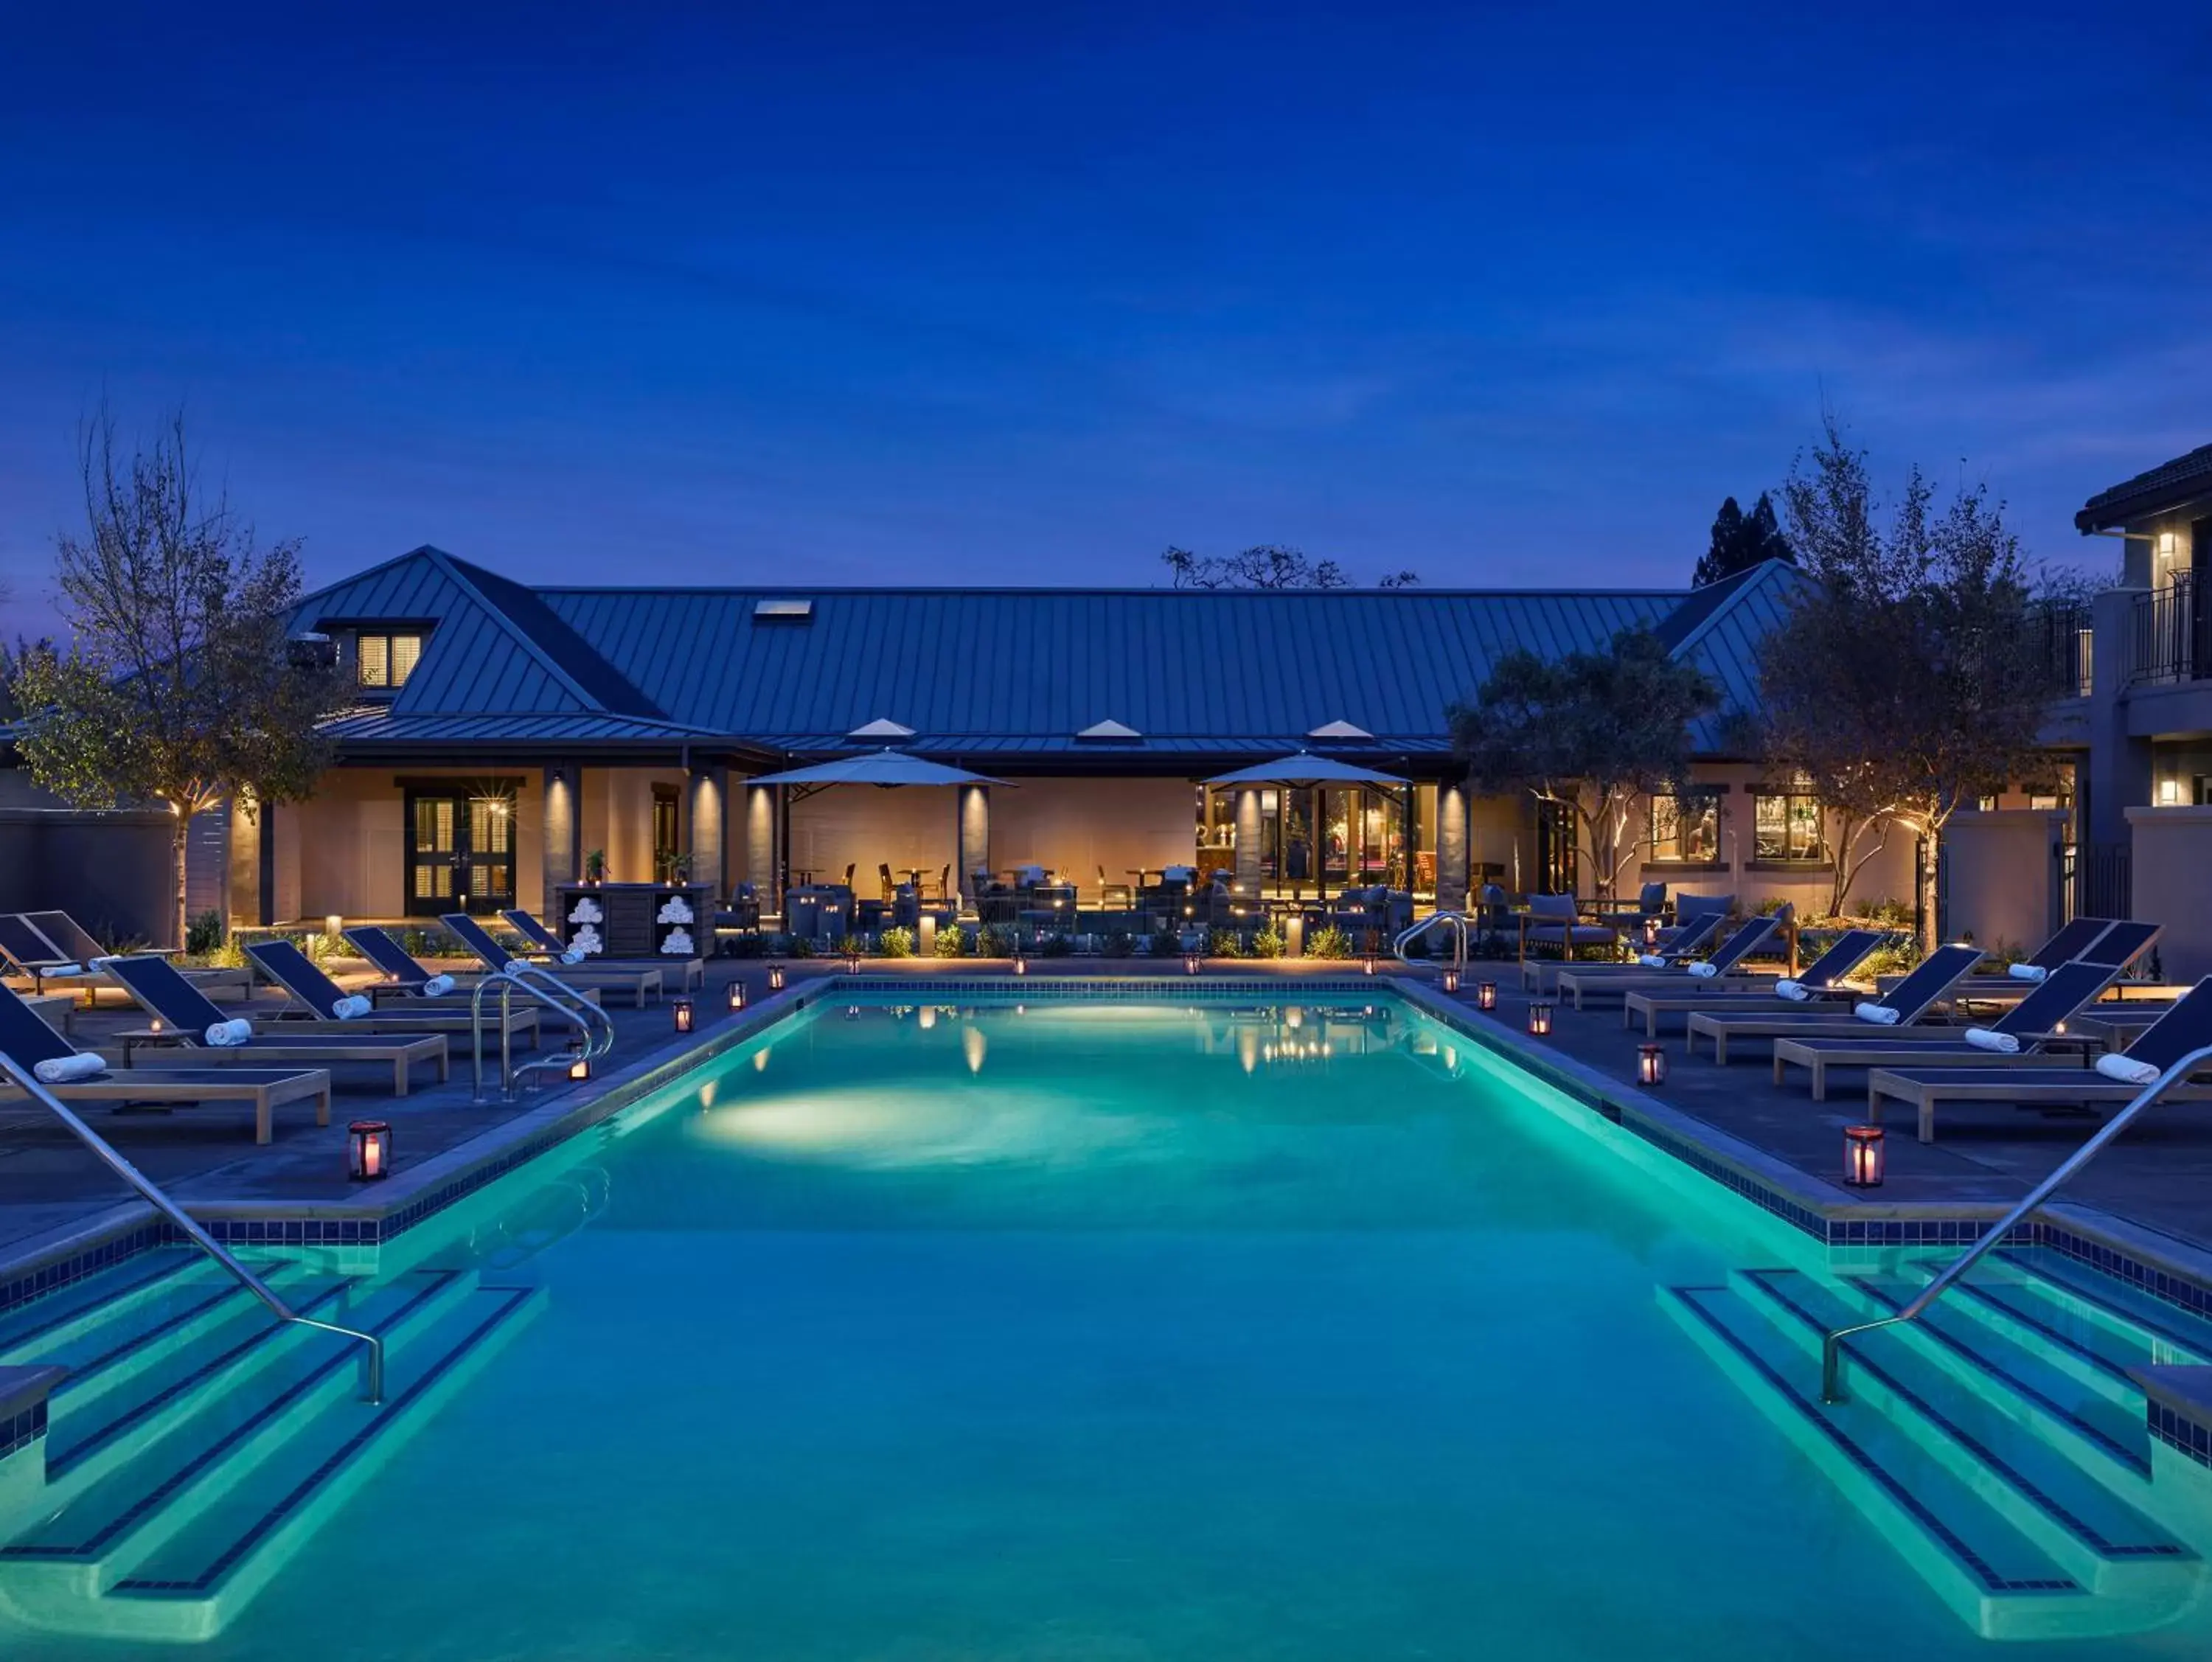 Property building, Swimming Pool in The Estate Yountville